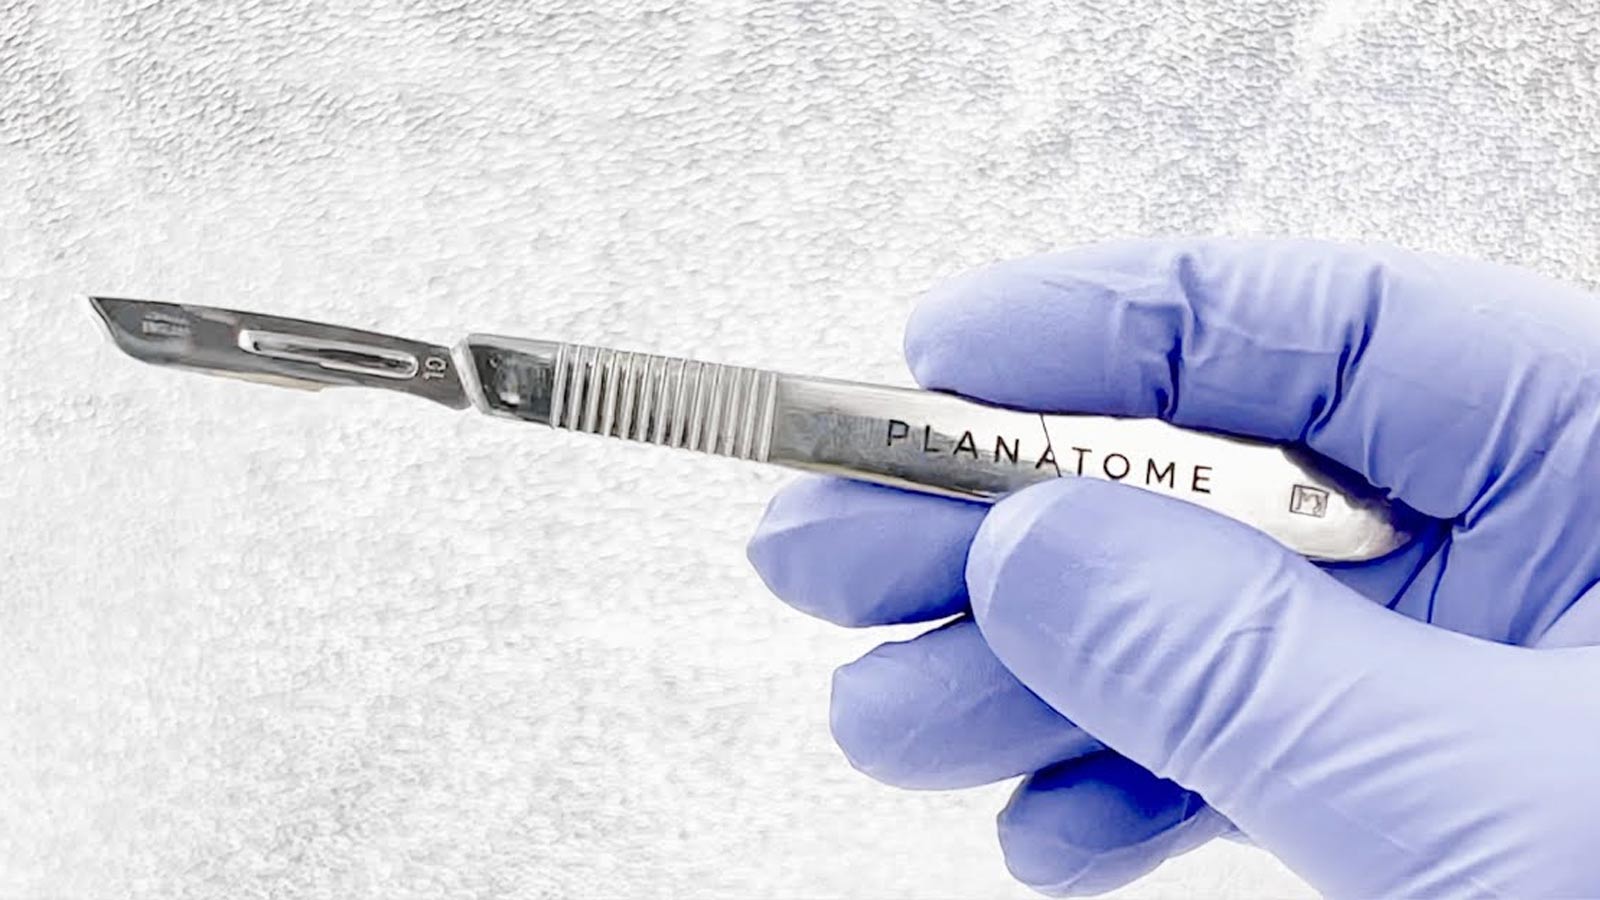 A gloved hand holds a Planatome surgical blade...